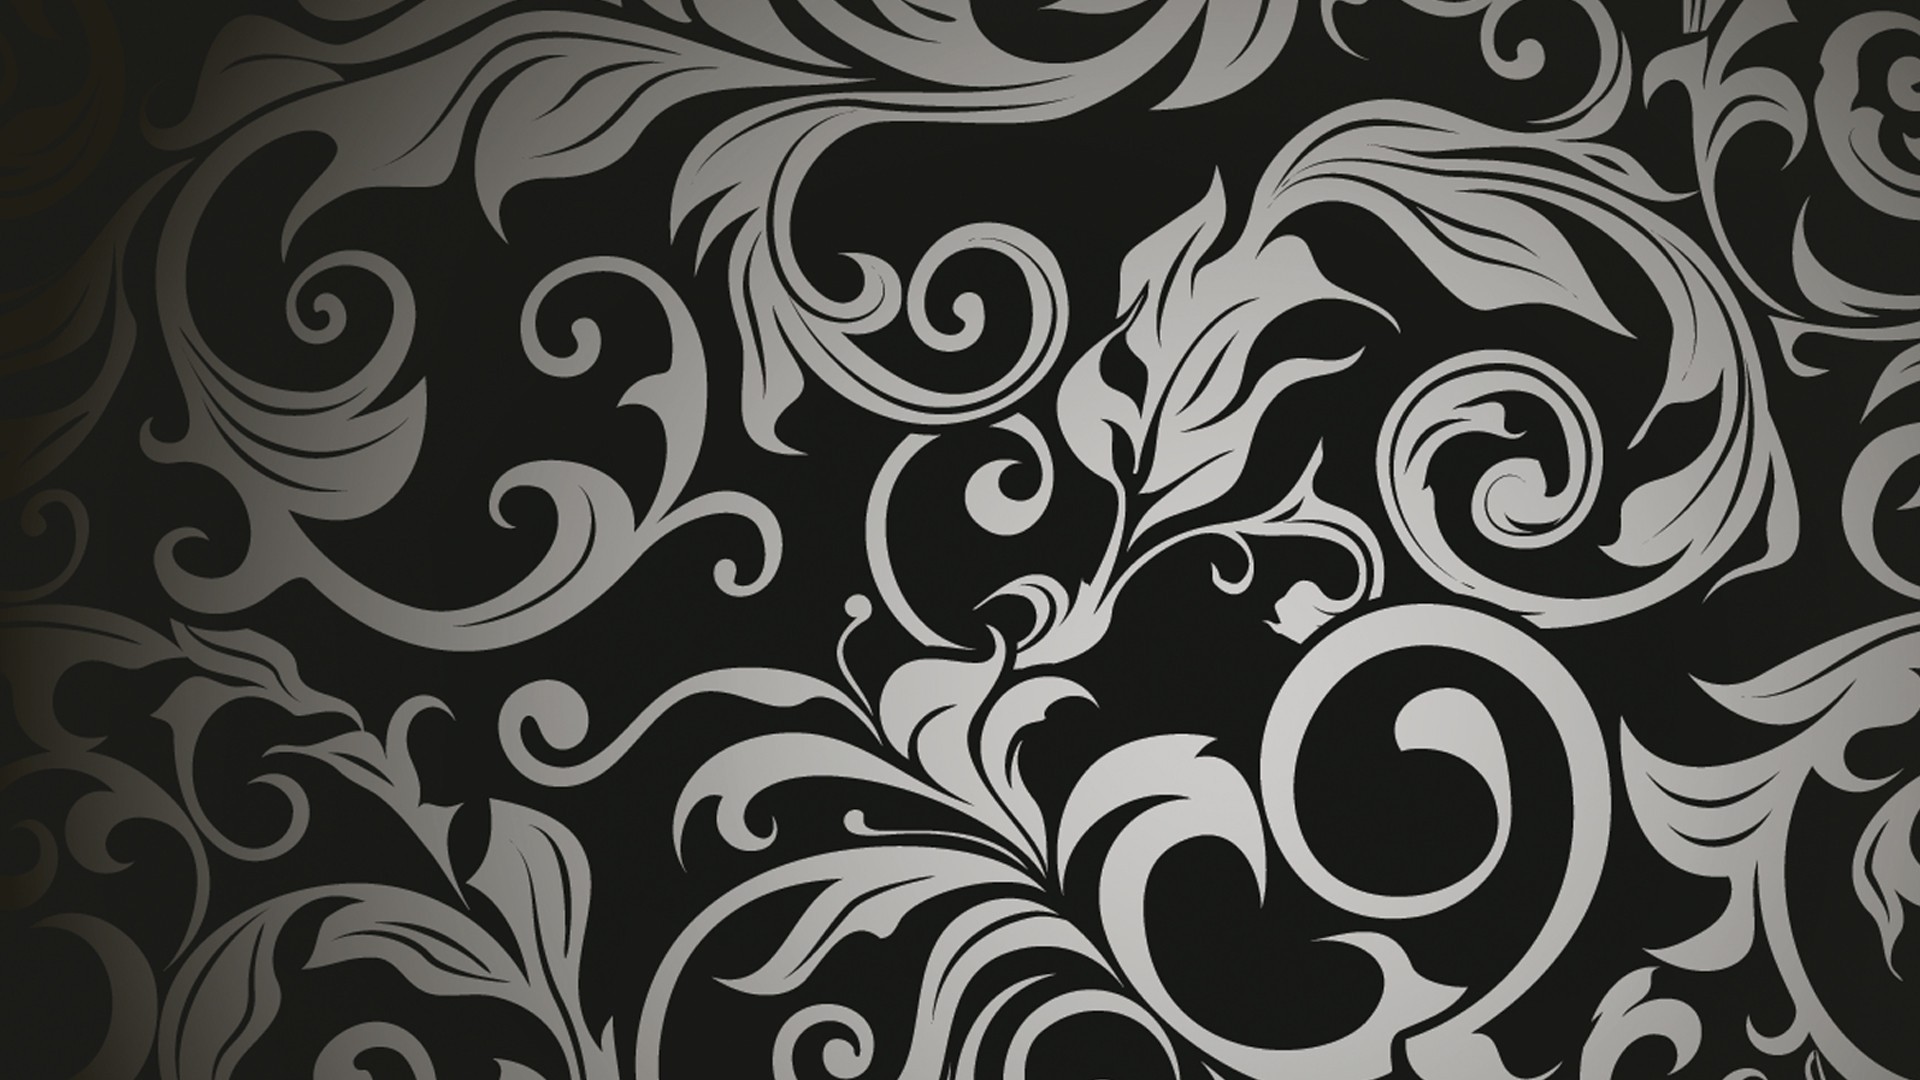 1920x1080 Black And White Vintage Wallpaper Images #c4a • Abstract at .